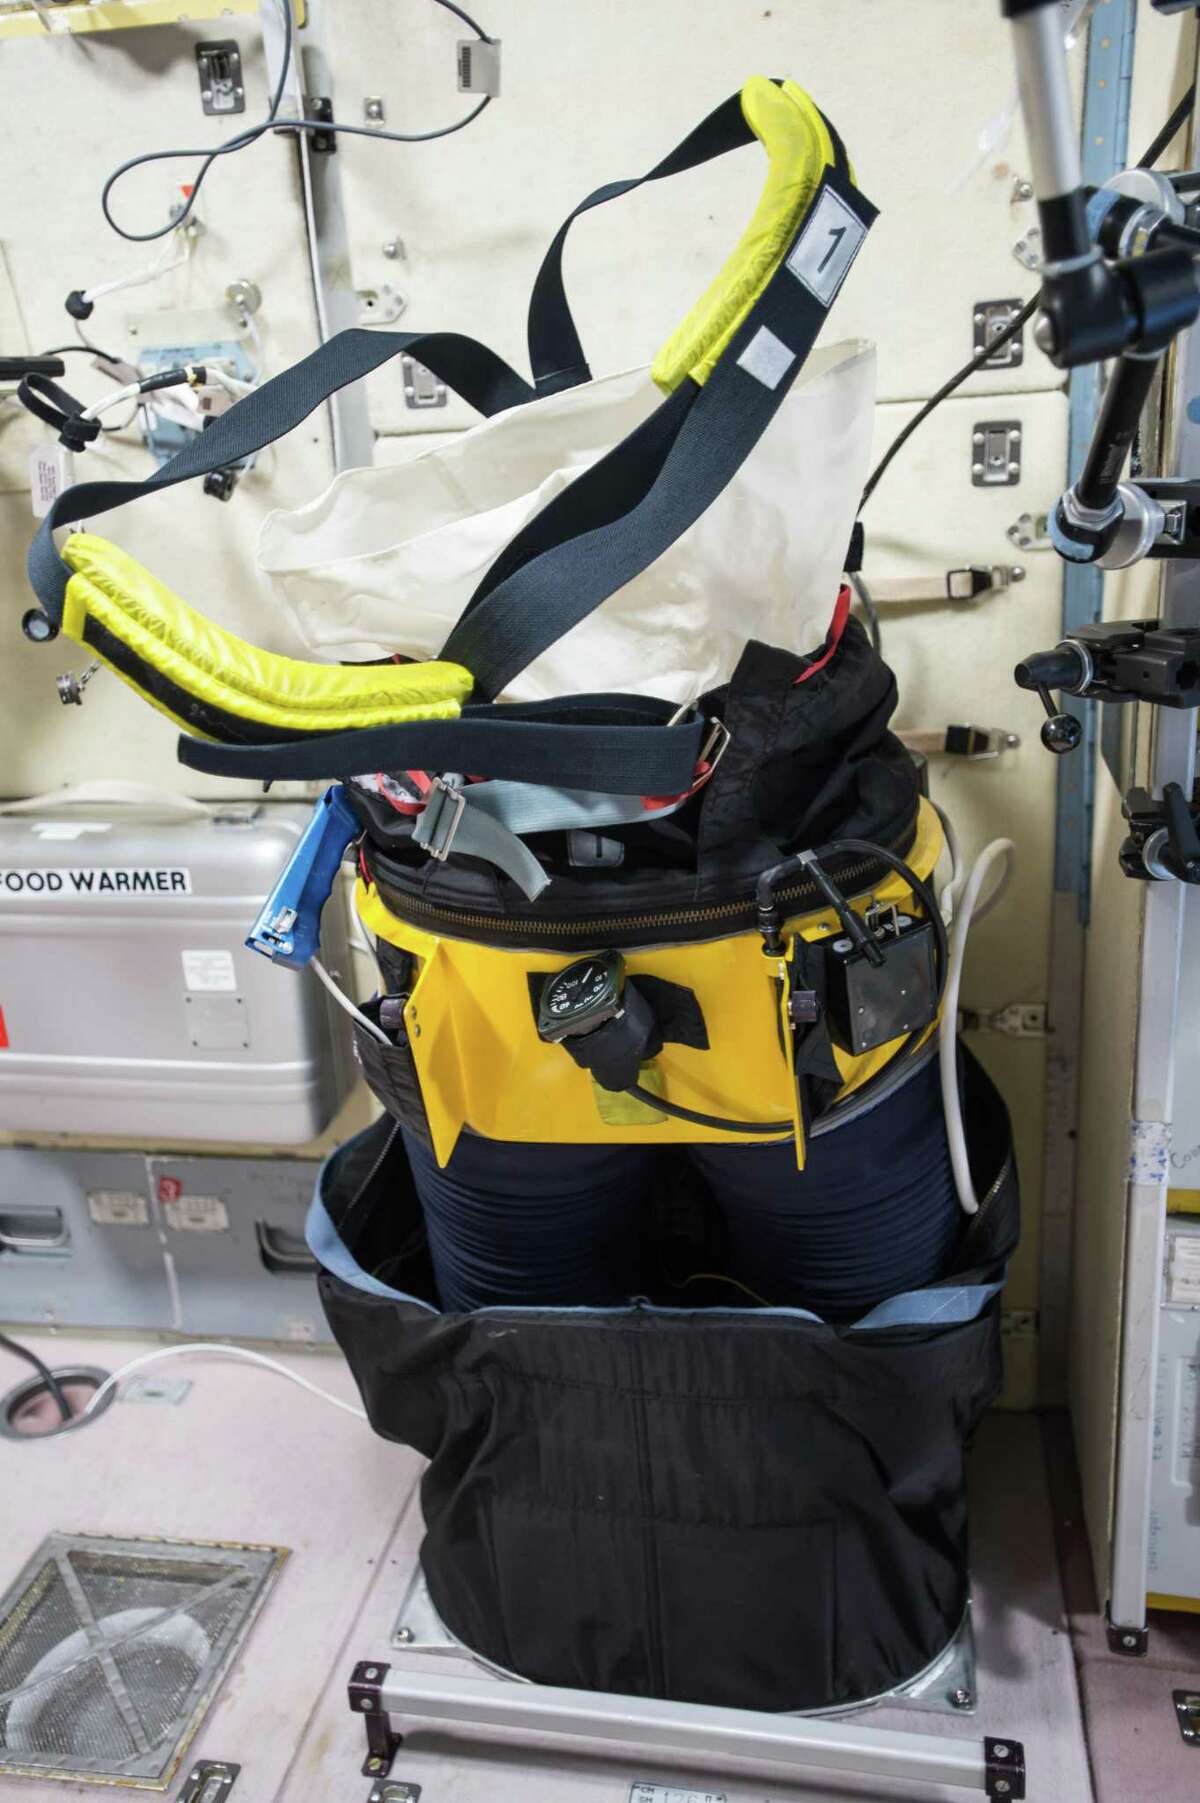 A Chibis Lower Body Negative Pressure Suit is shown.